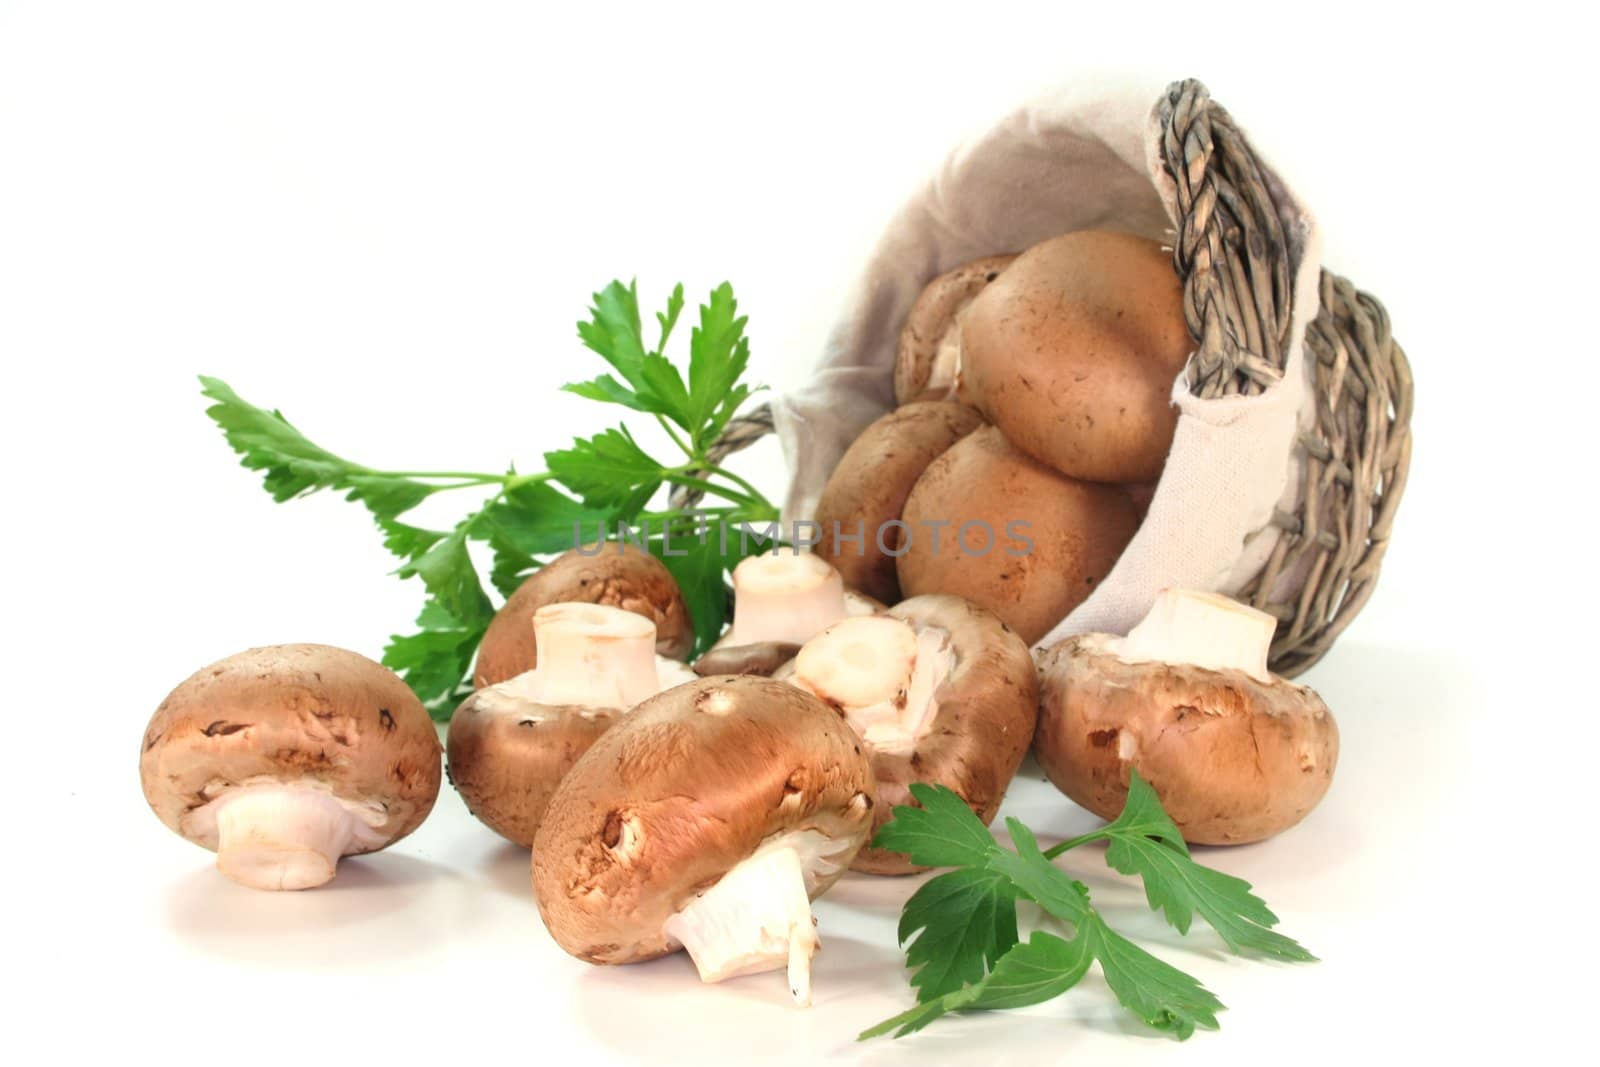 Mushrooms in a basket with parsley on a white background